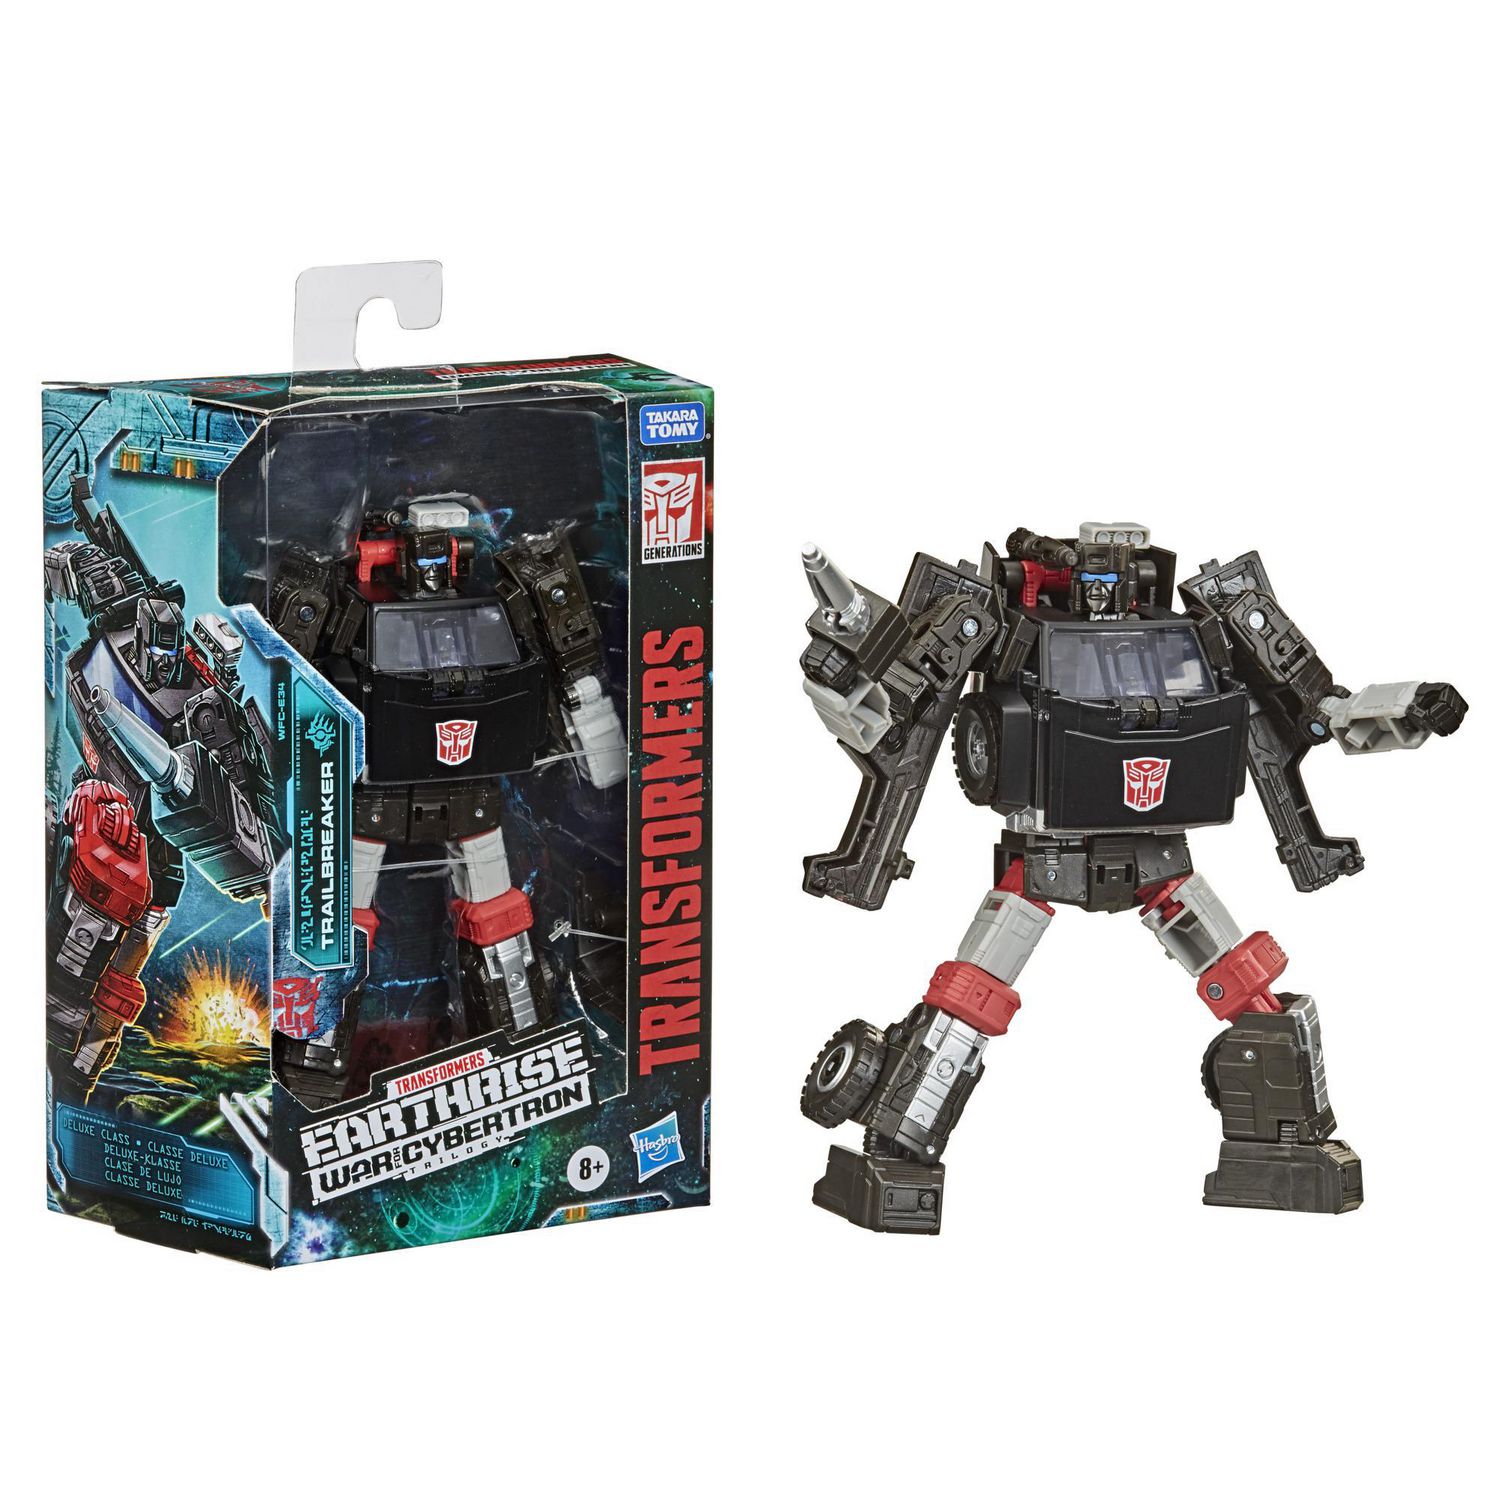 Transformers Trailbreaker Earthrise War for Cybertron NEW SEALED IN STOCK